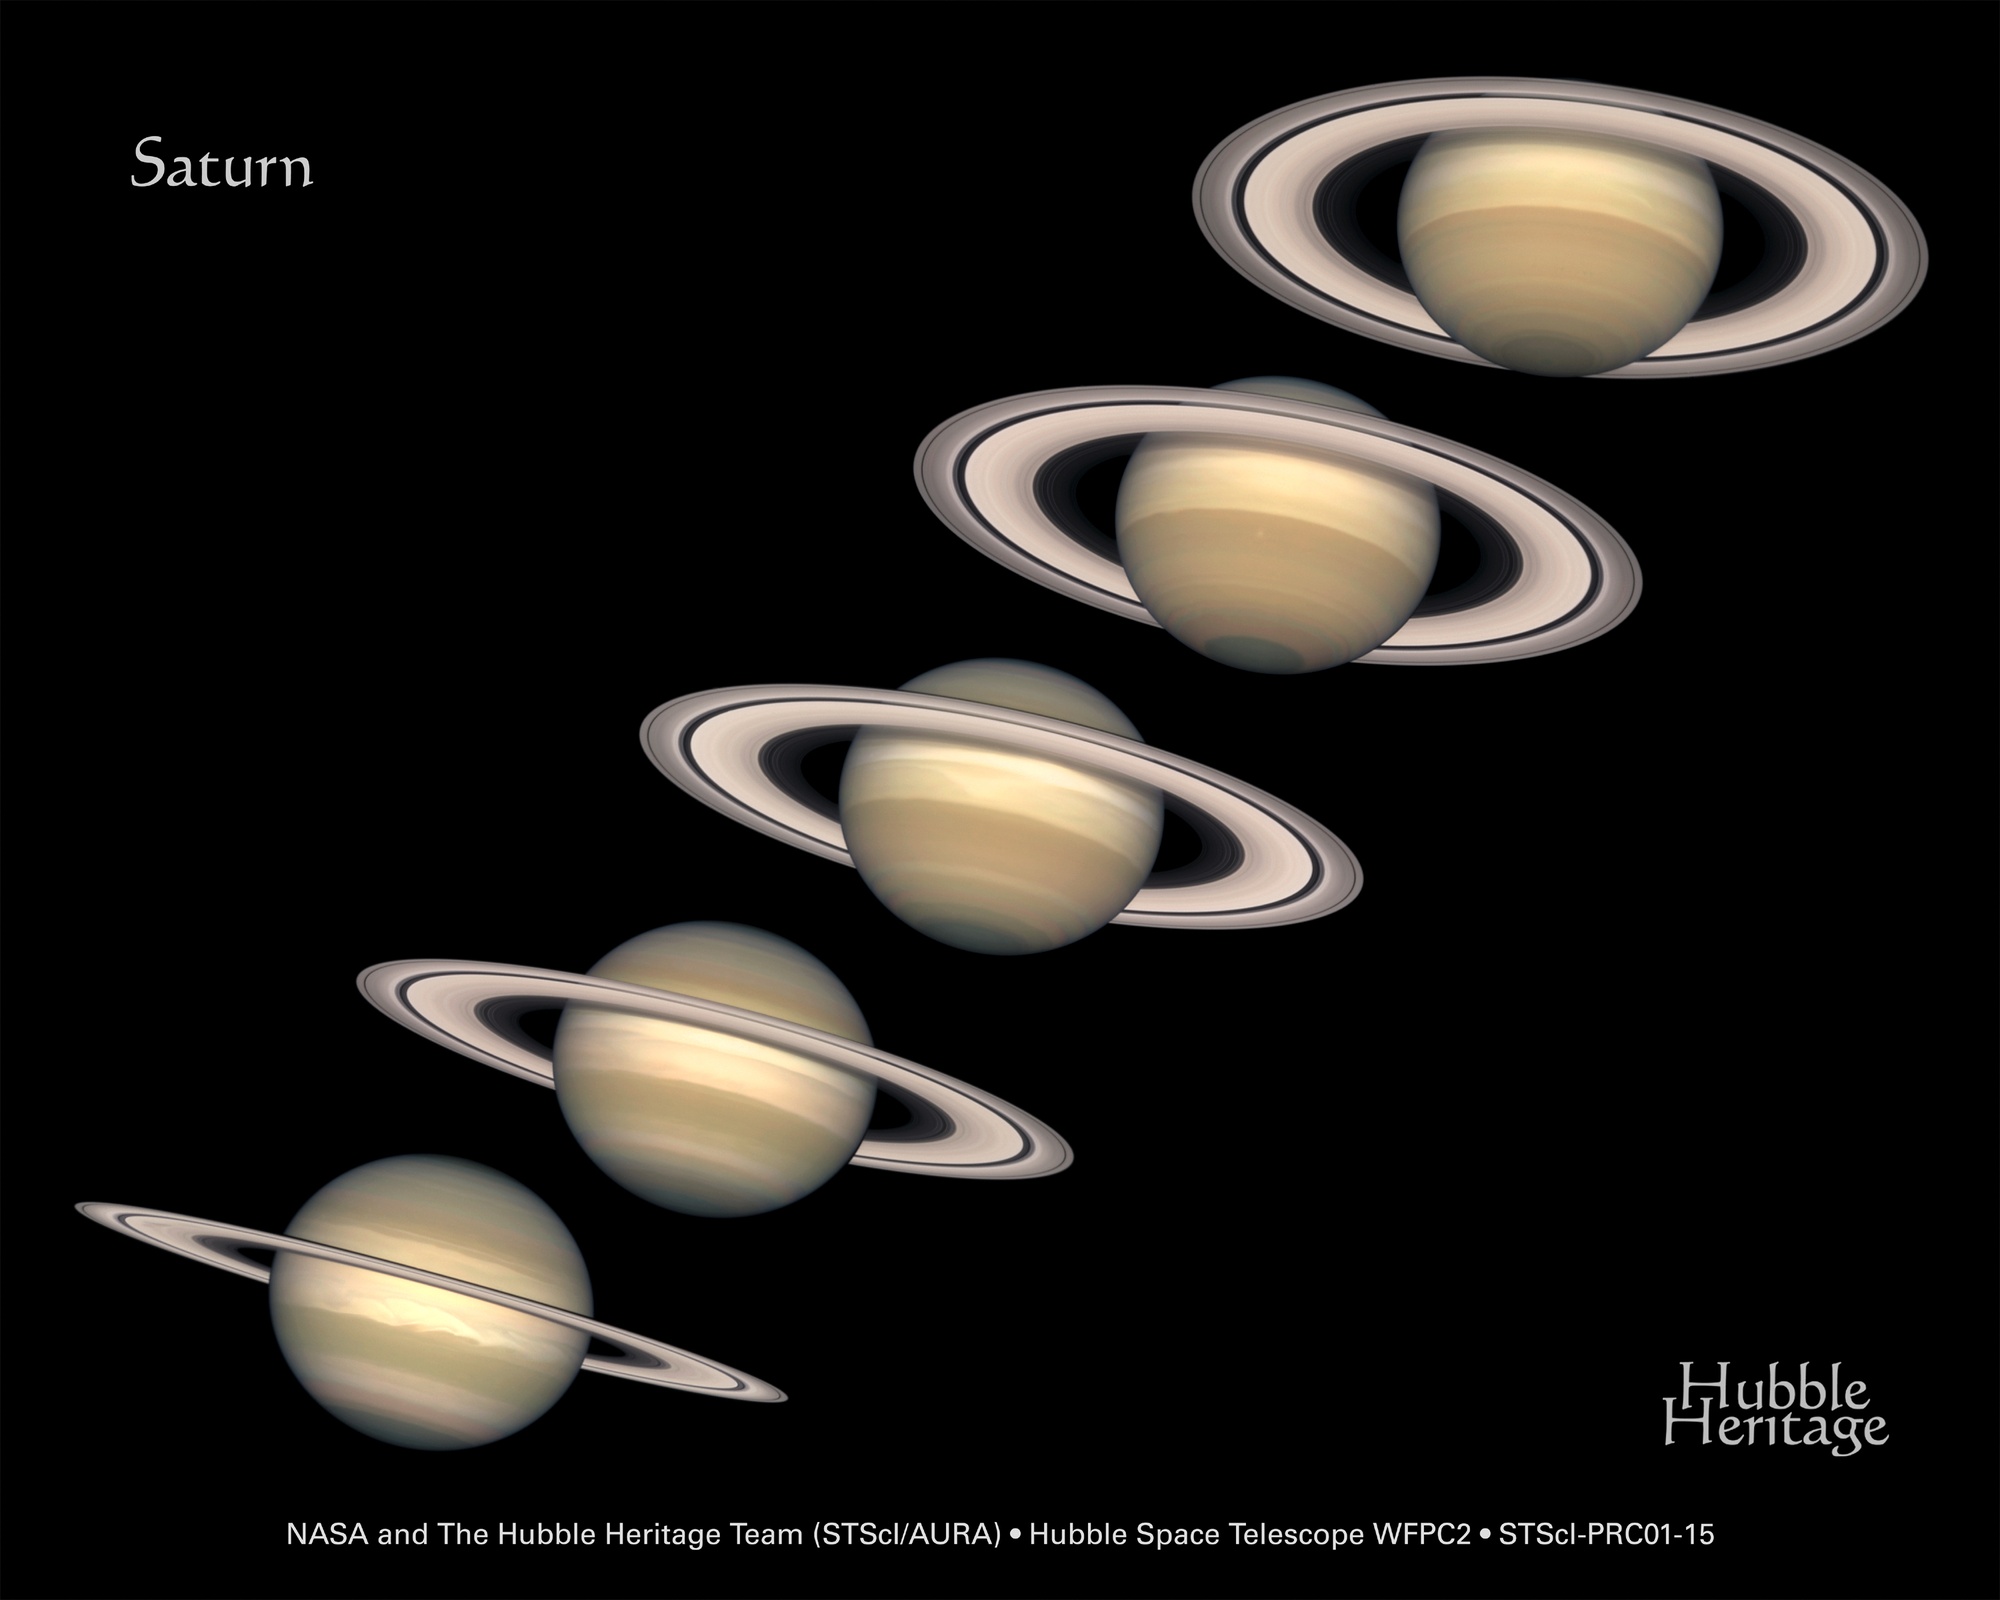 NASA PRESS RELEASE LARGE FORMAT TRANSPARENCY MARS HUBBLE SHOT OF SATURN W/  RINGS » Labex Electrolarynxes